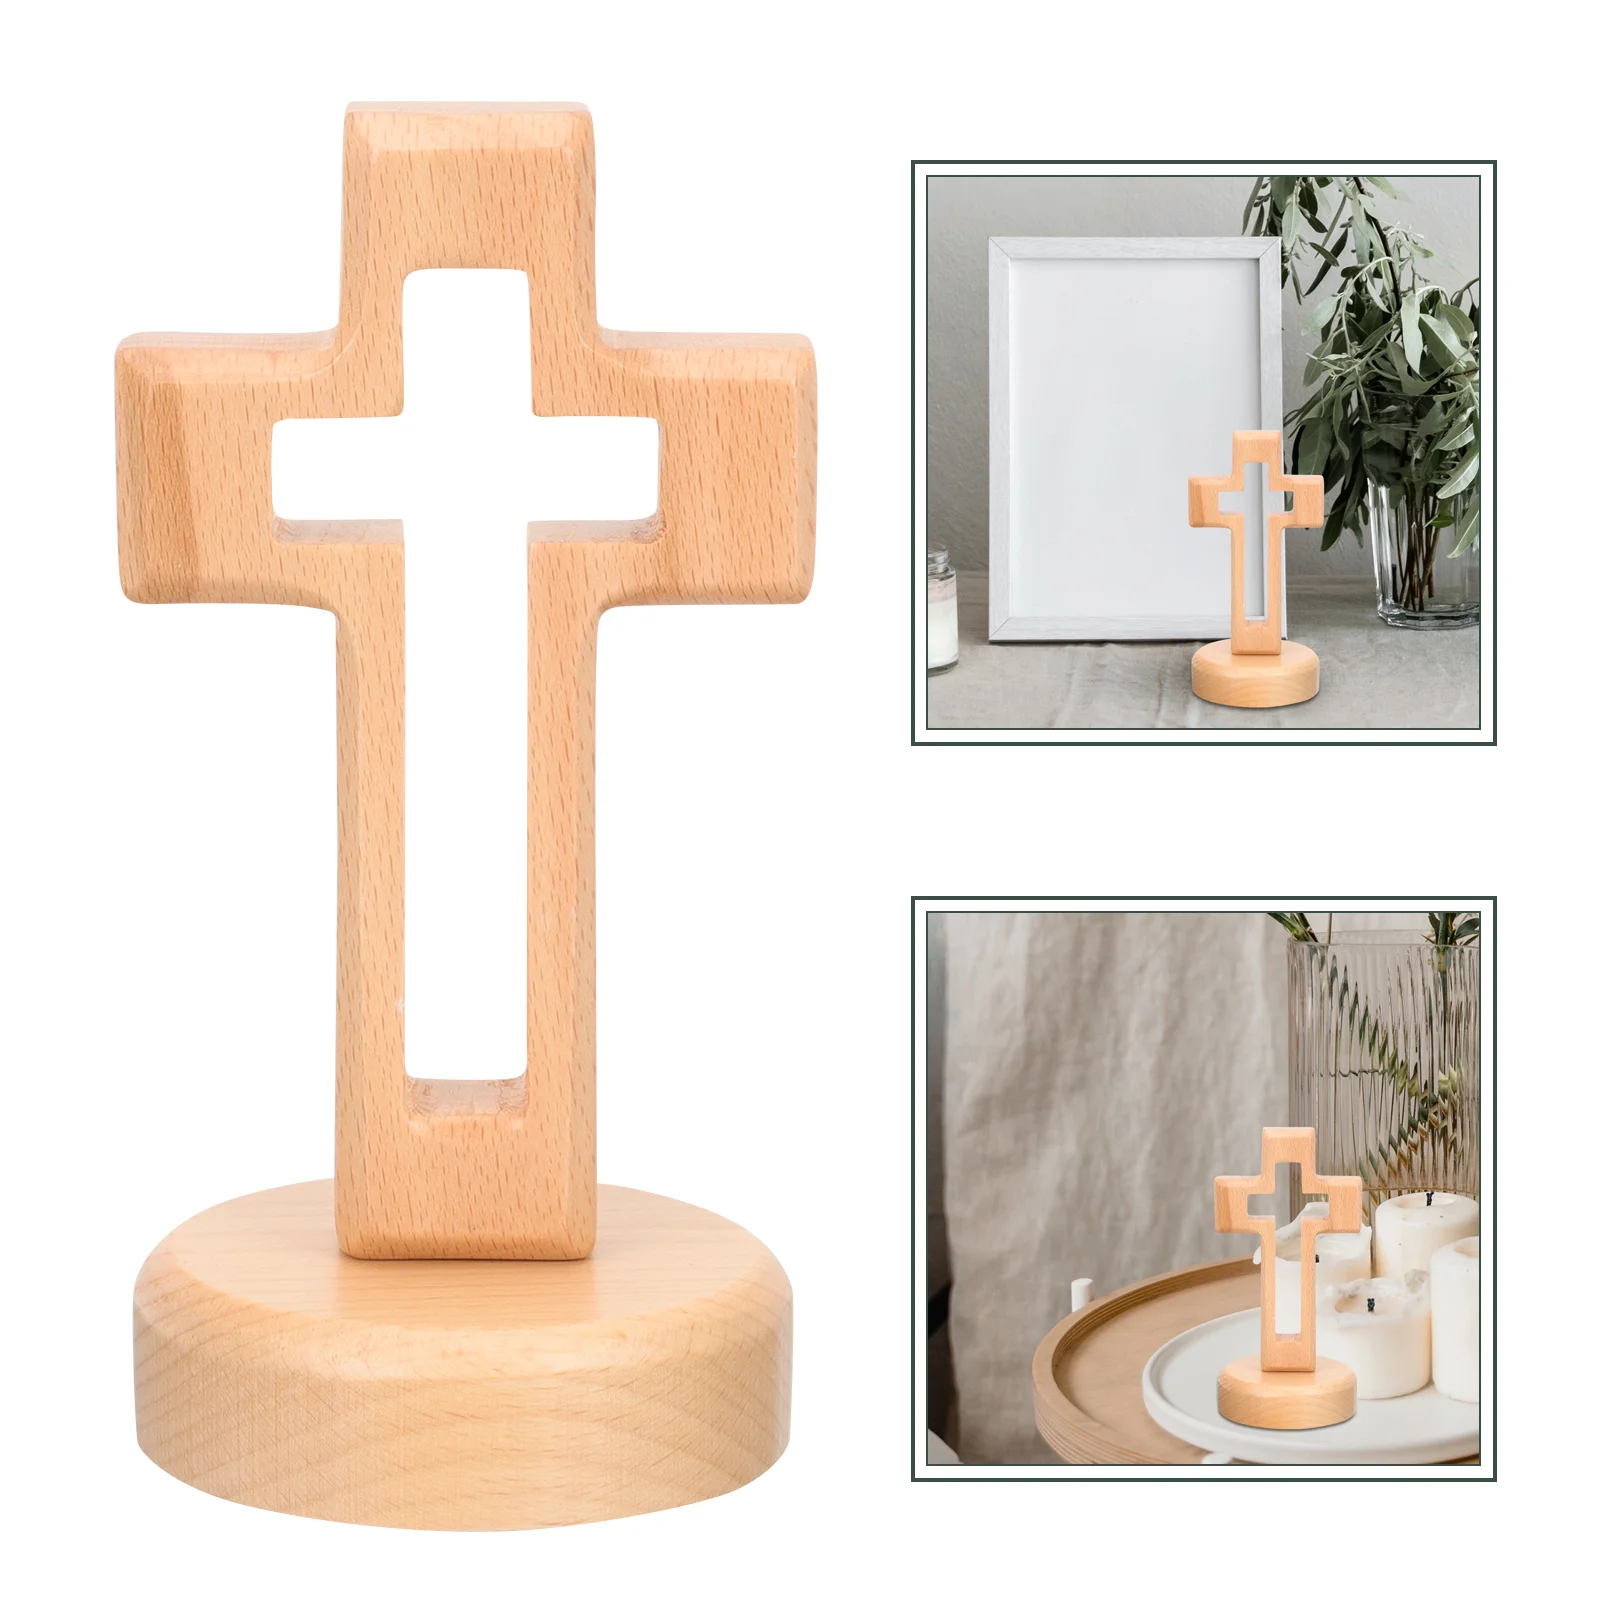 

Cross Wood Crucifix Wooden Standing Decor Religious Baby Jesus Gifts Rainbow Wall Christian Crosses Table Ornament Catholic Holy